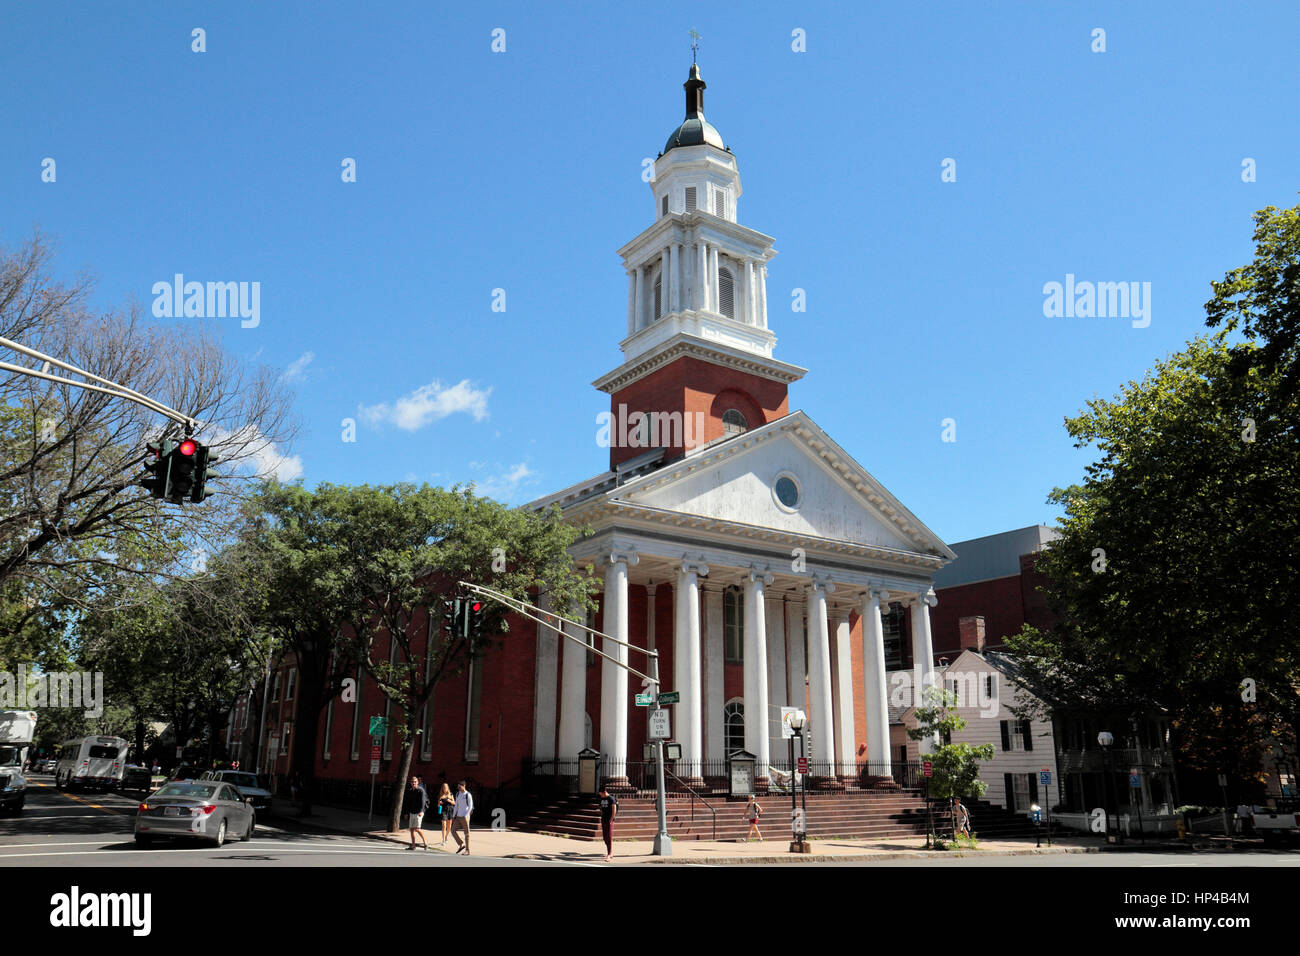 First and Summerfield United Methodist Church, New Haven Green, New Haven, Connecticut, United States. Stock Photo